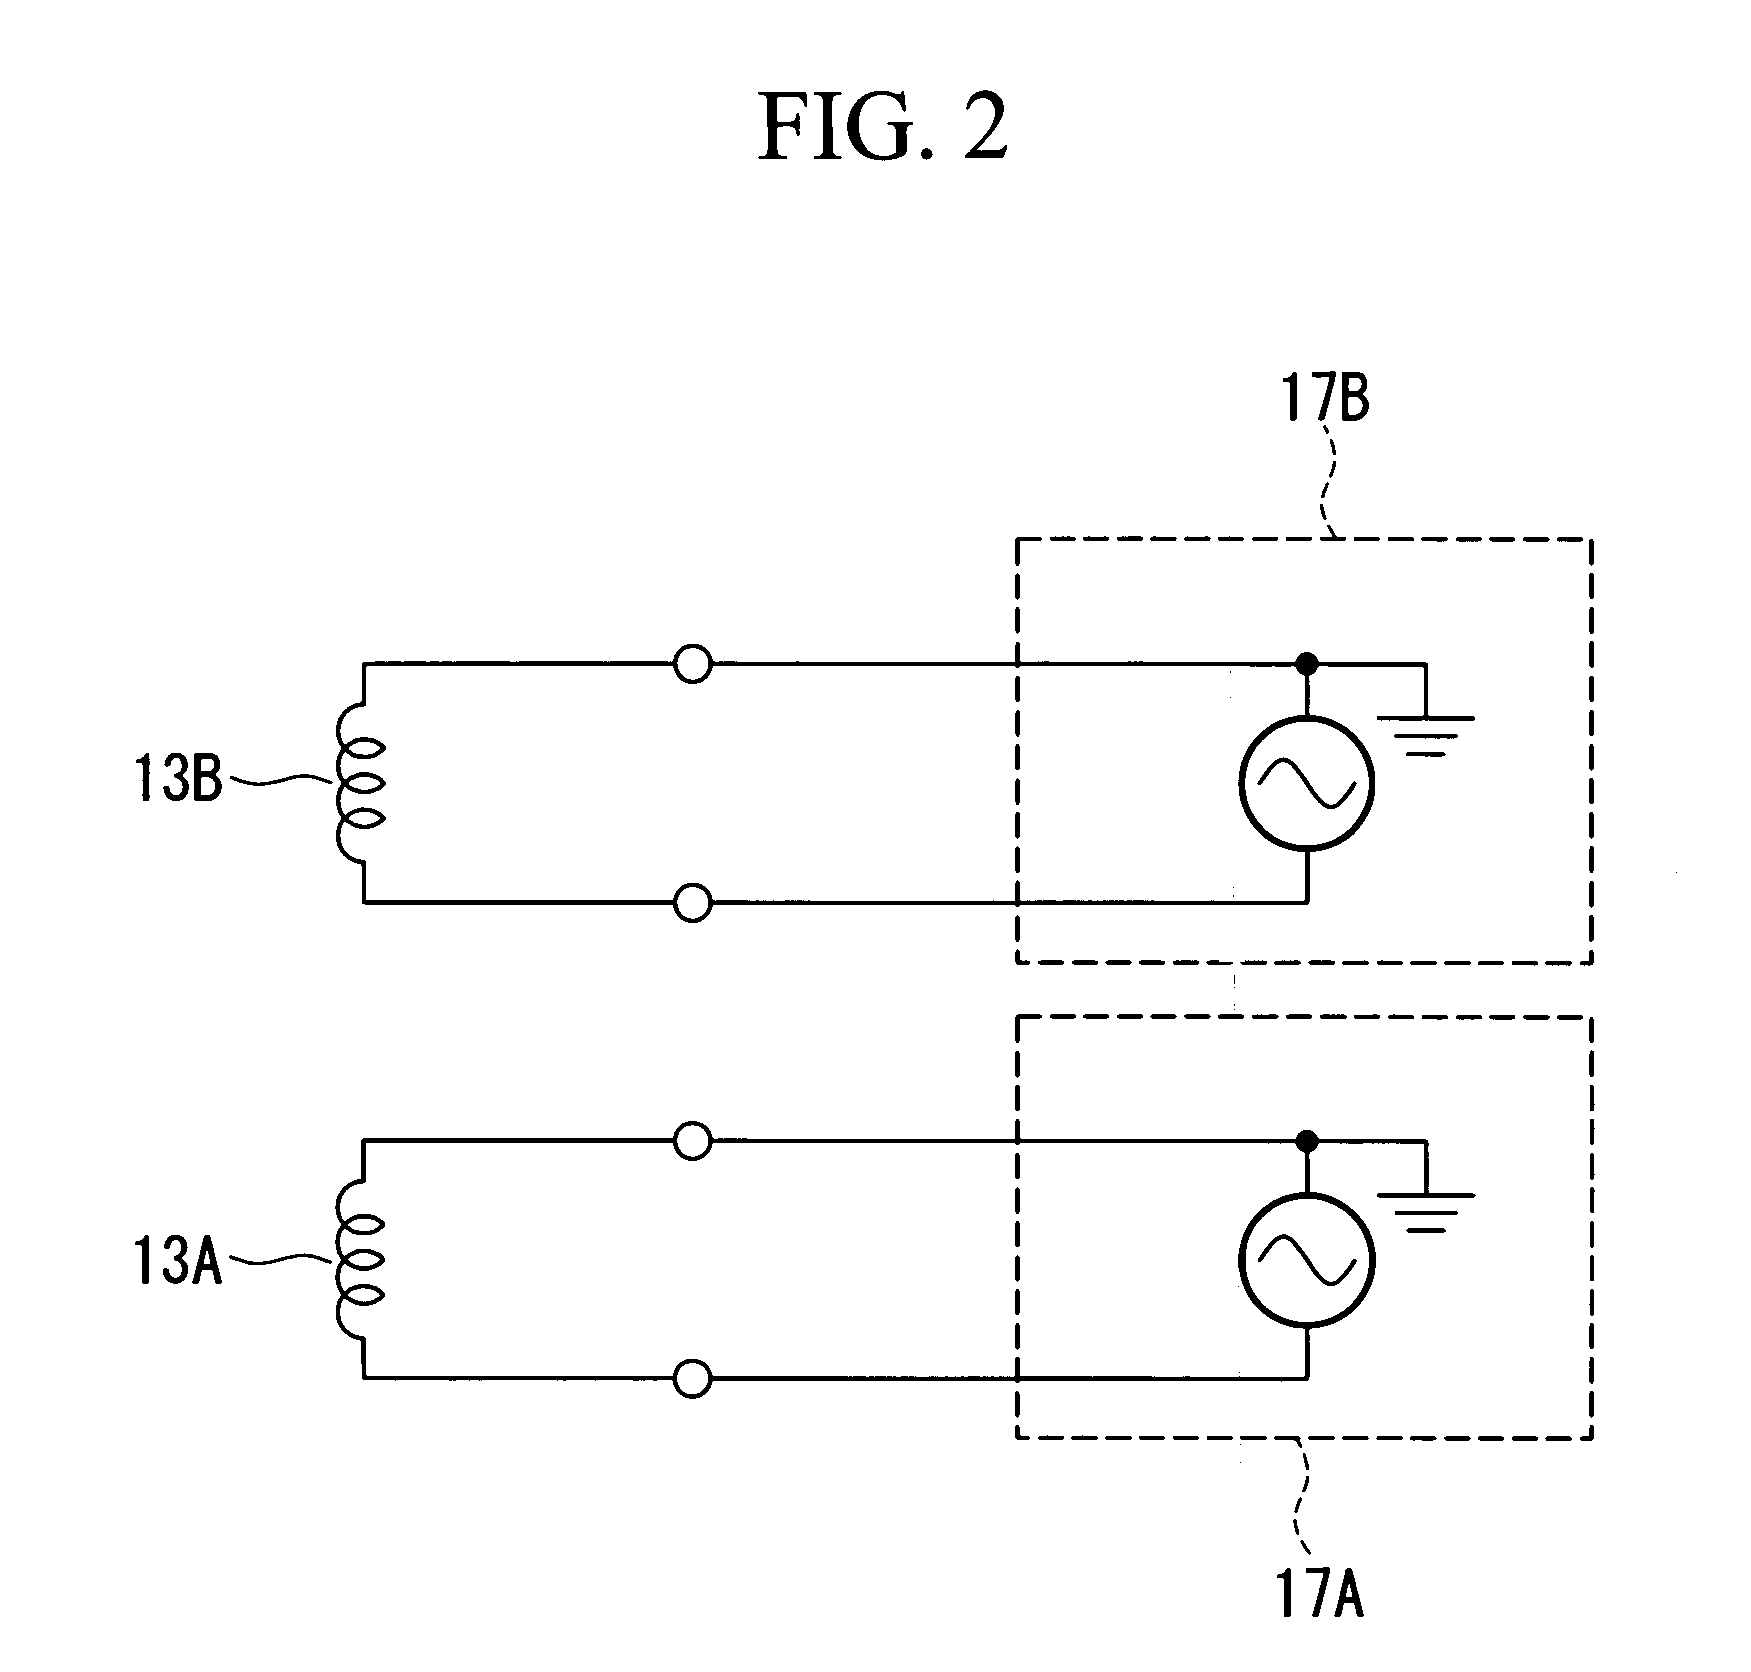 Medical device magnetic guidance/position detection system